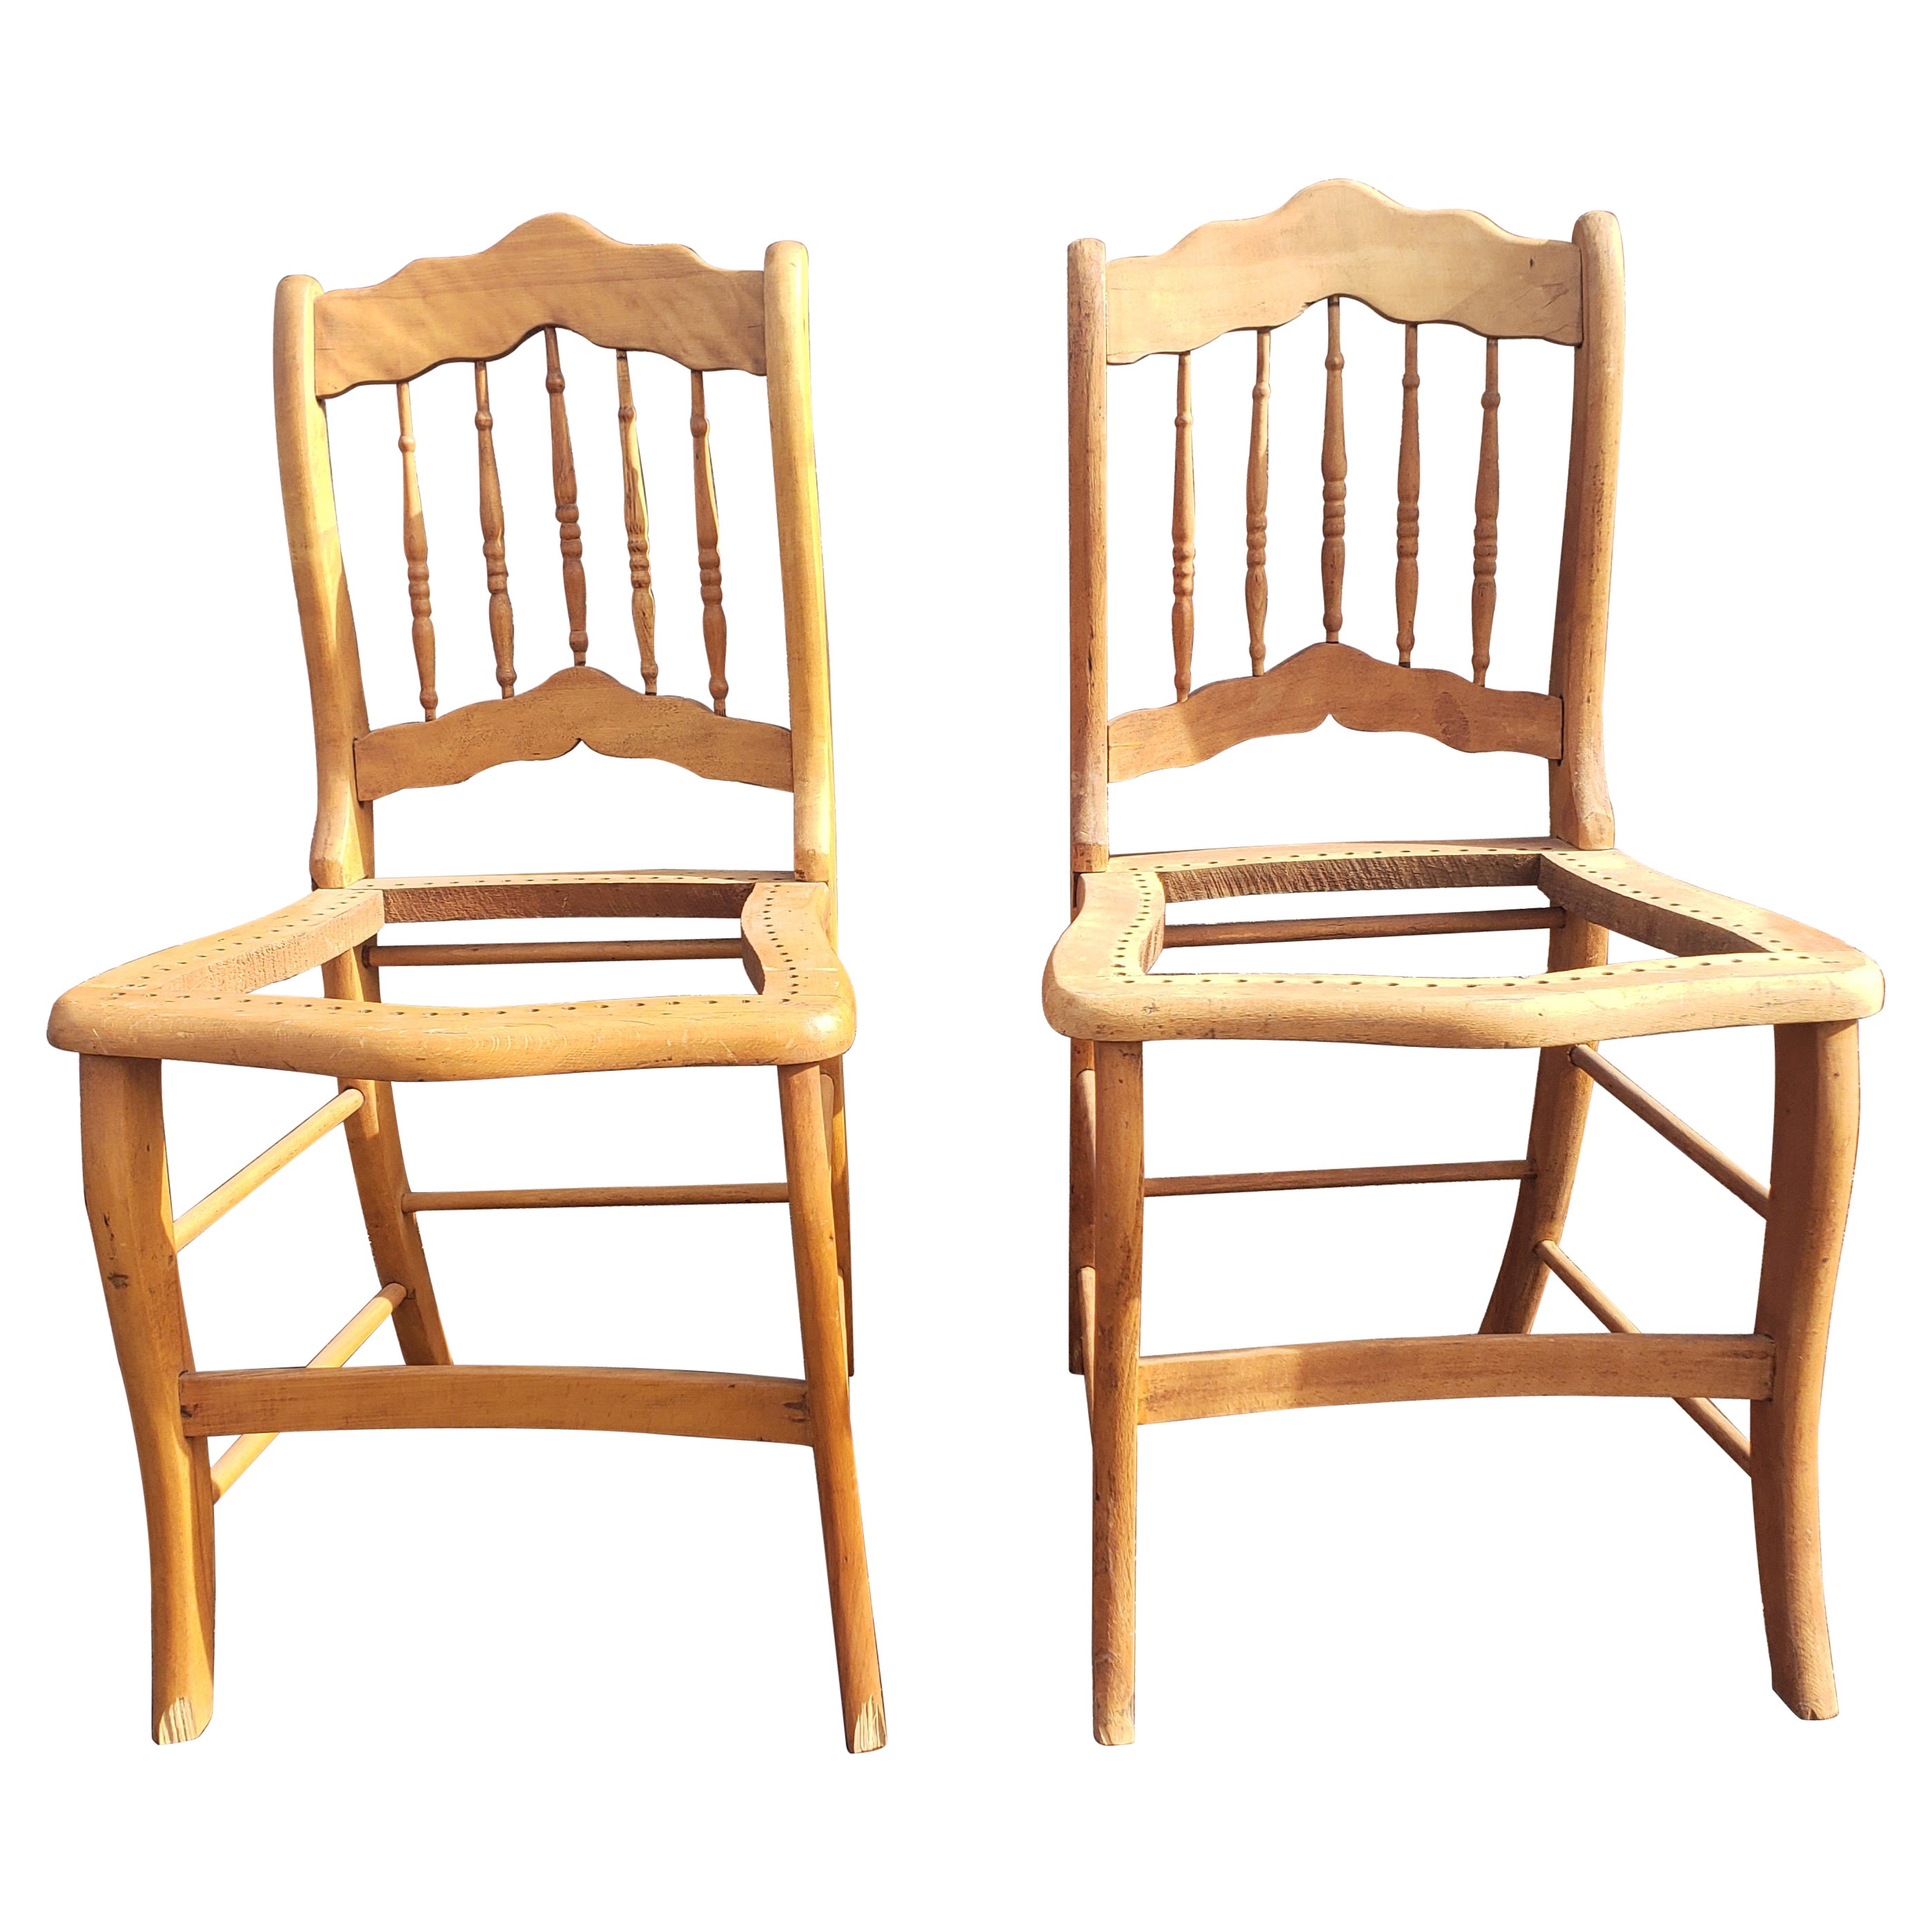 Early American Maple Side Chair Frames, a Pair, circa 1880s